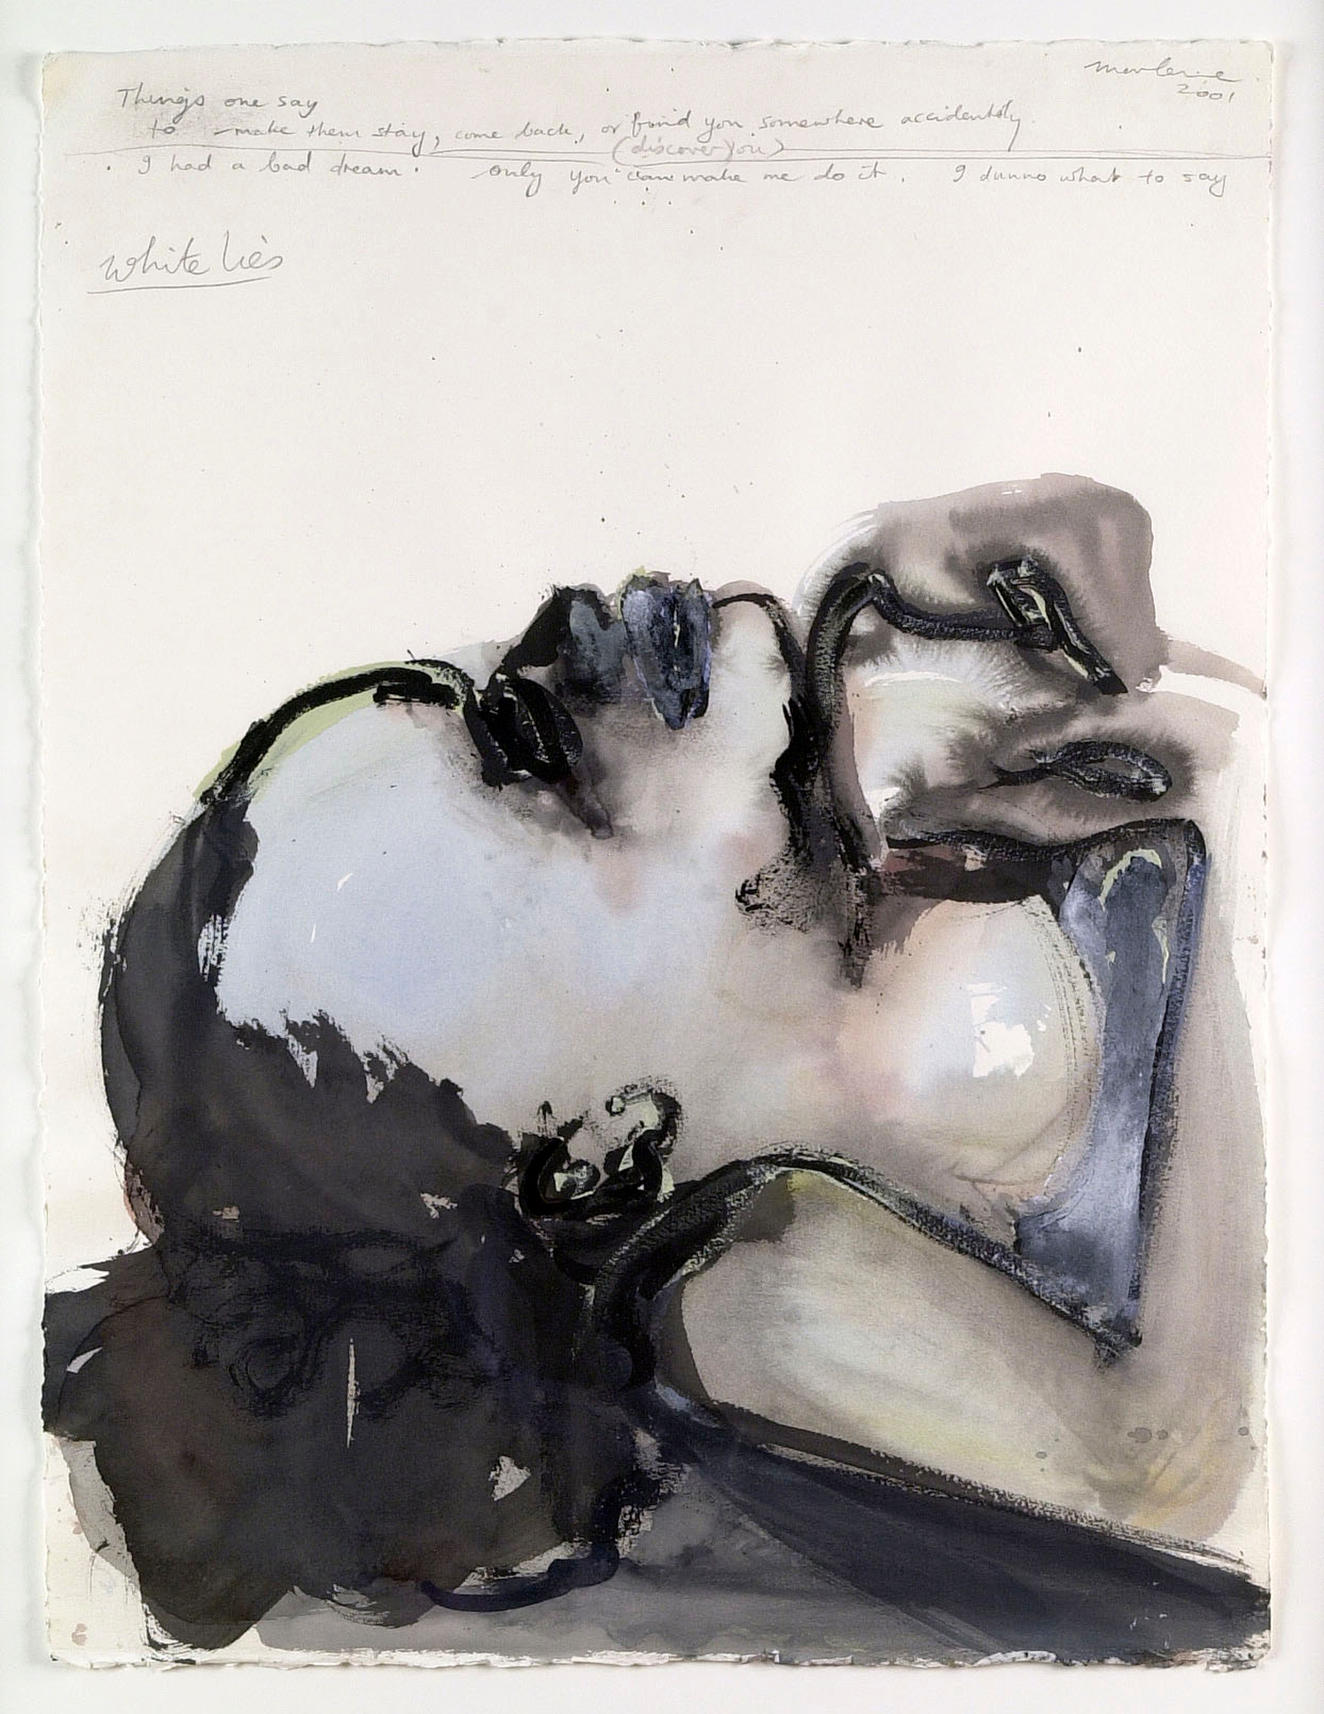 A woman lying on her back with only head and shoulders visible, her arms wrapped tight against her chest. She is in black and blue watercolor. Text at top reads: “Things one say to make them stay, come back, or find you somewhere accidentally (discover you) I had a bad dream. Only you can make me do it. I dunno what to say.” Under that, text reads: “White Lies.”